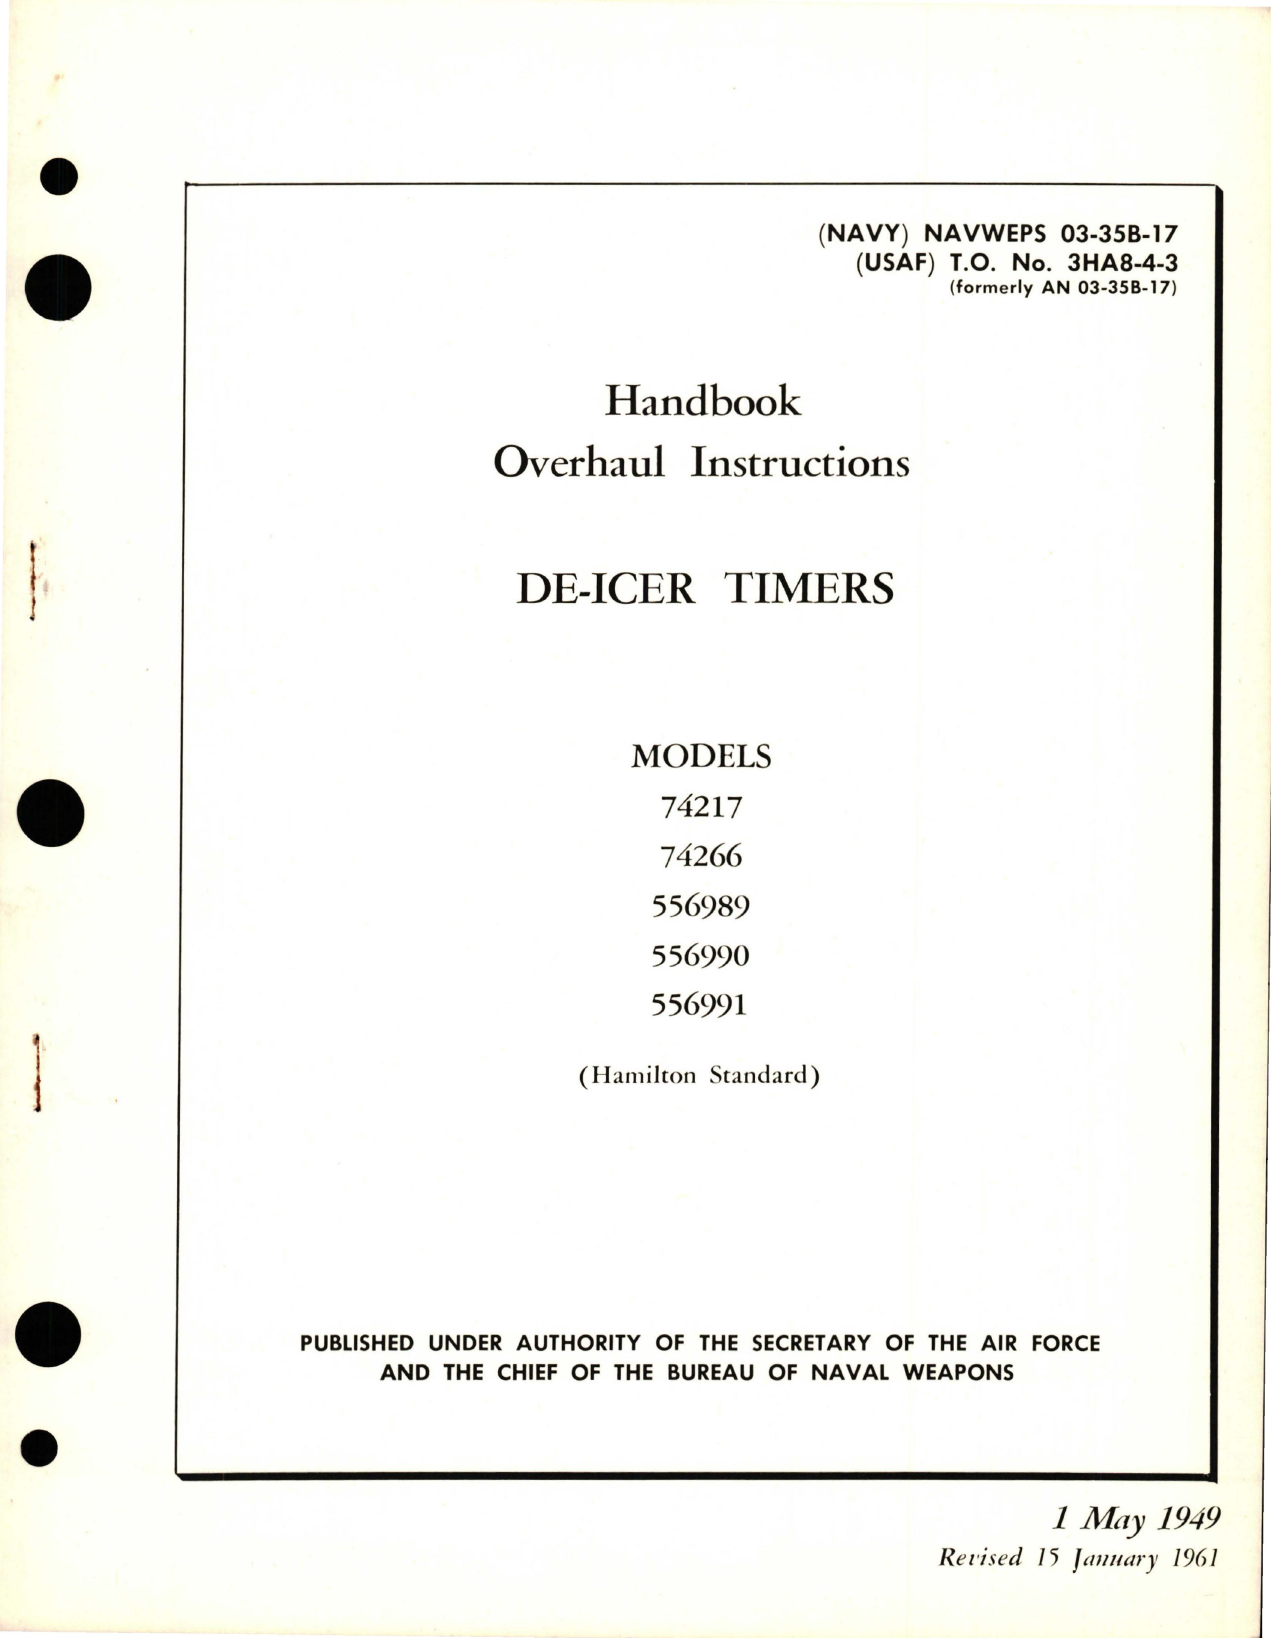 Sample page 1 from AirCorps Library document: Overhaul Instructions for De-Icer Timers - Models 74217, 74266, 556989, 556990, and 556991